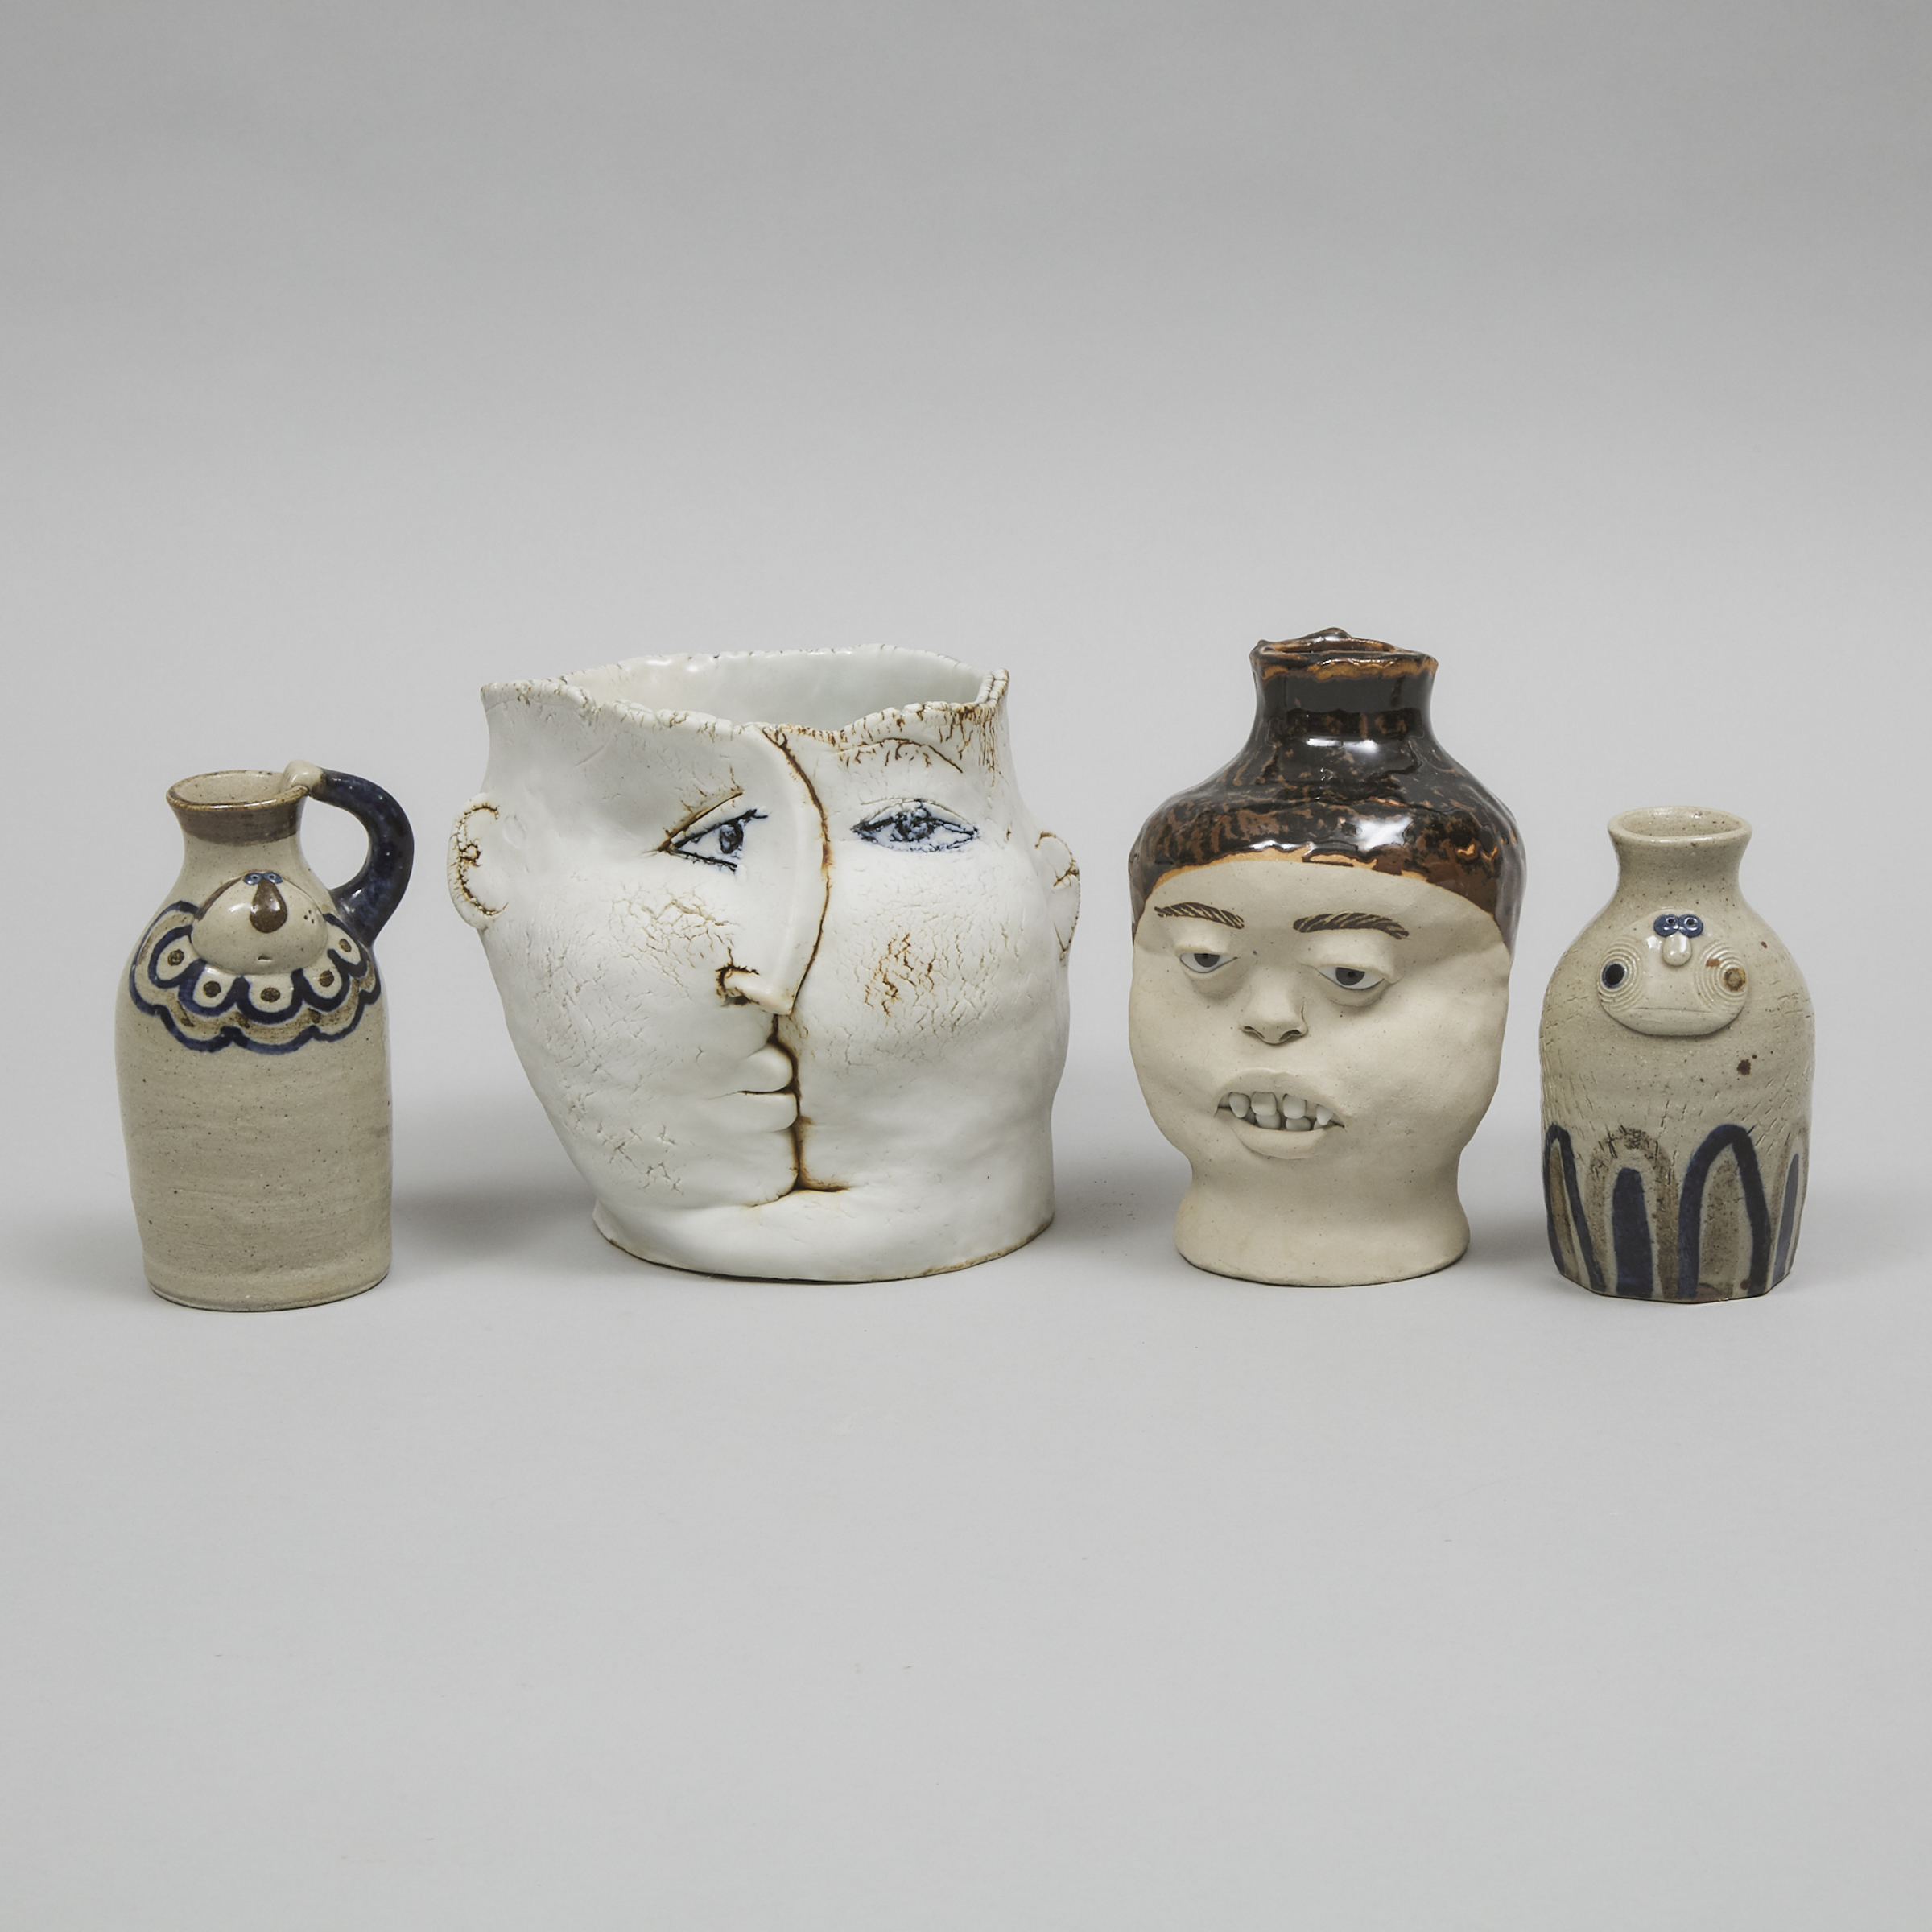 Wato Abe (Japanese, b.1937), Four Figural Vessels, late 20th/early 21st century